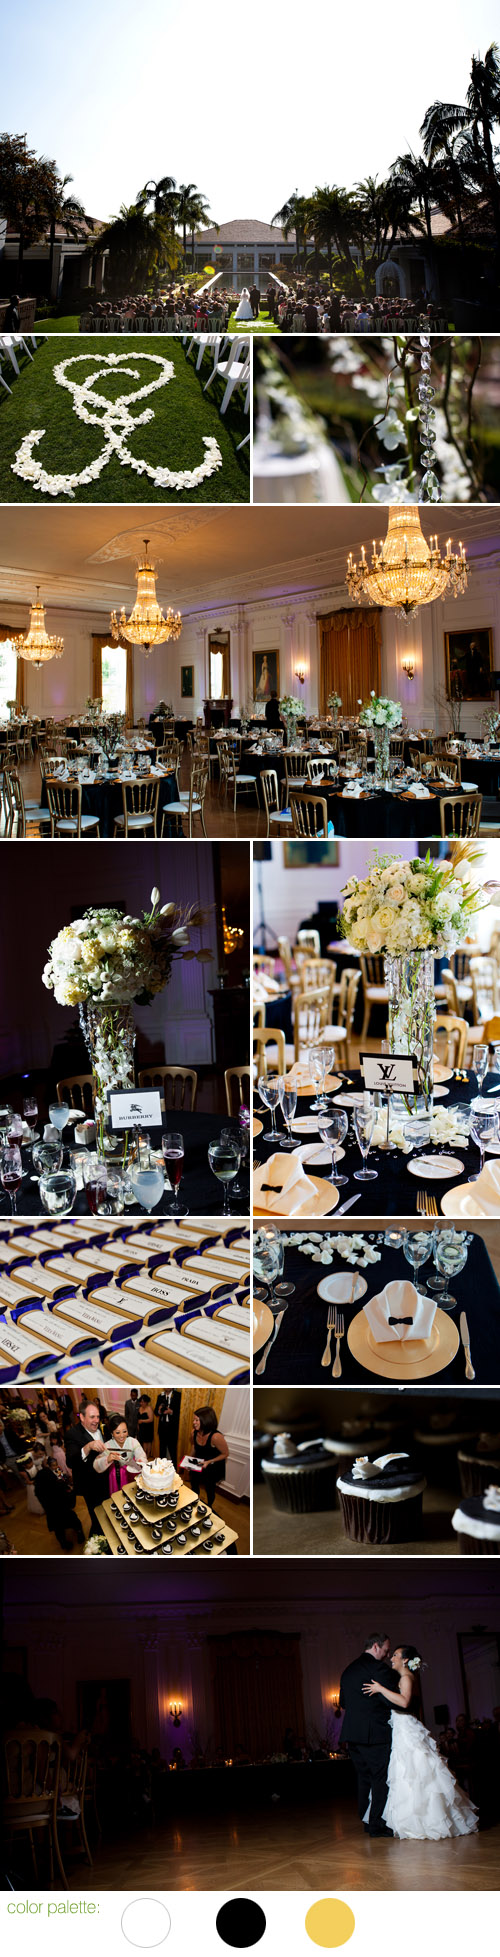 fashion magazine inspired wedding decor, black white and gold wedding color ideas, photos by D. Park Photography